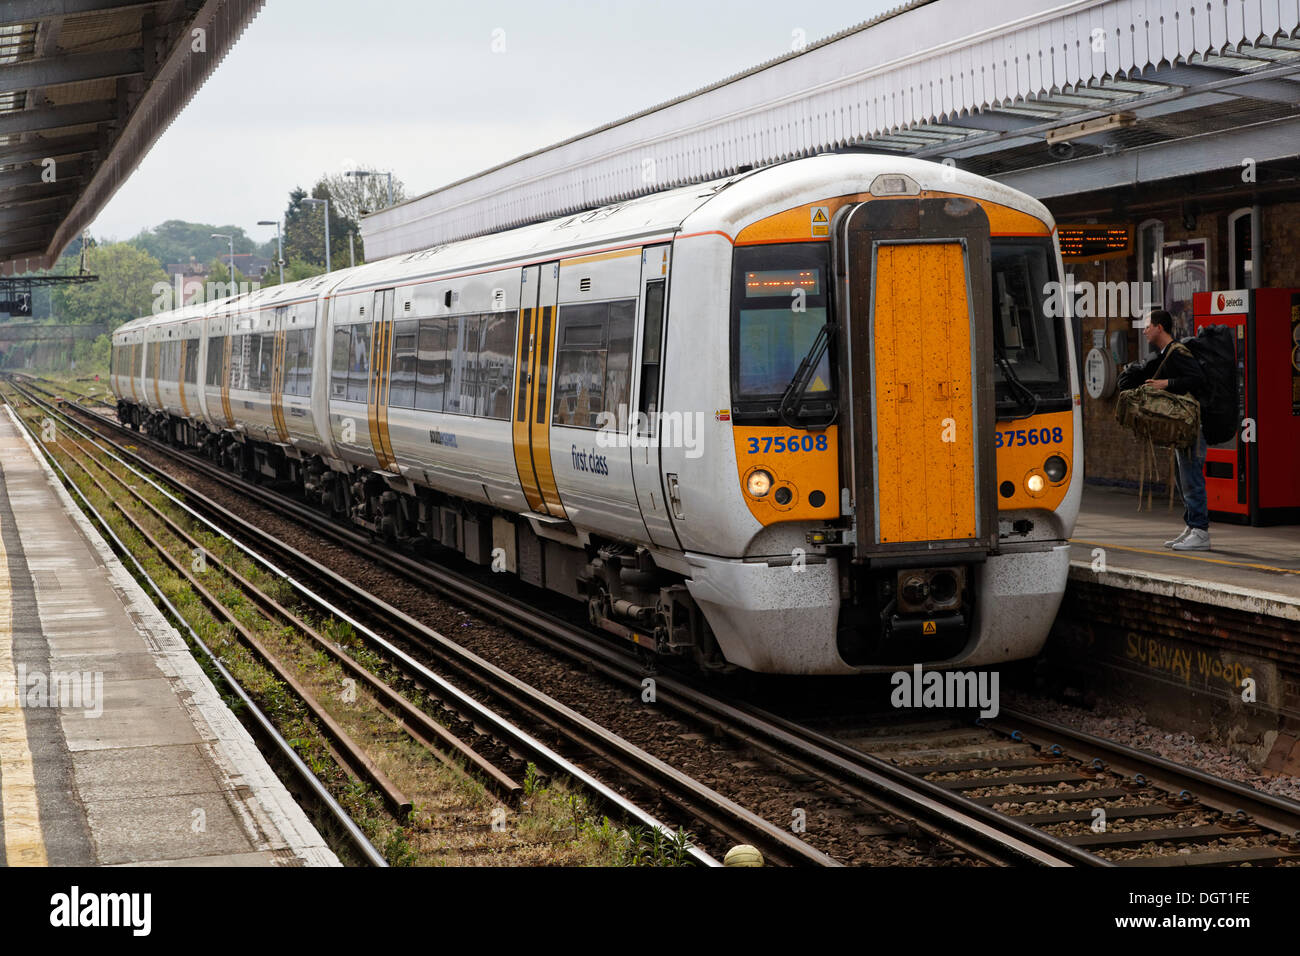 Train of the South-Eastern Railway, Canterbury Railway Station, South East England, administrative county of Kent, England Stock Photo